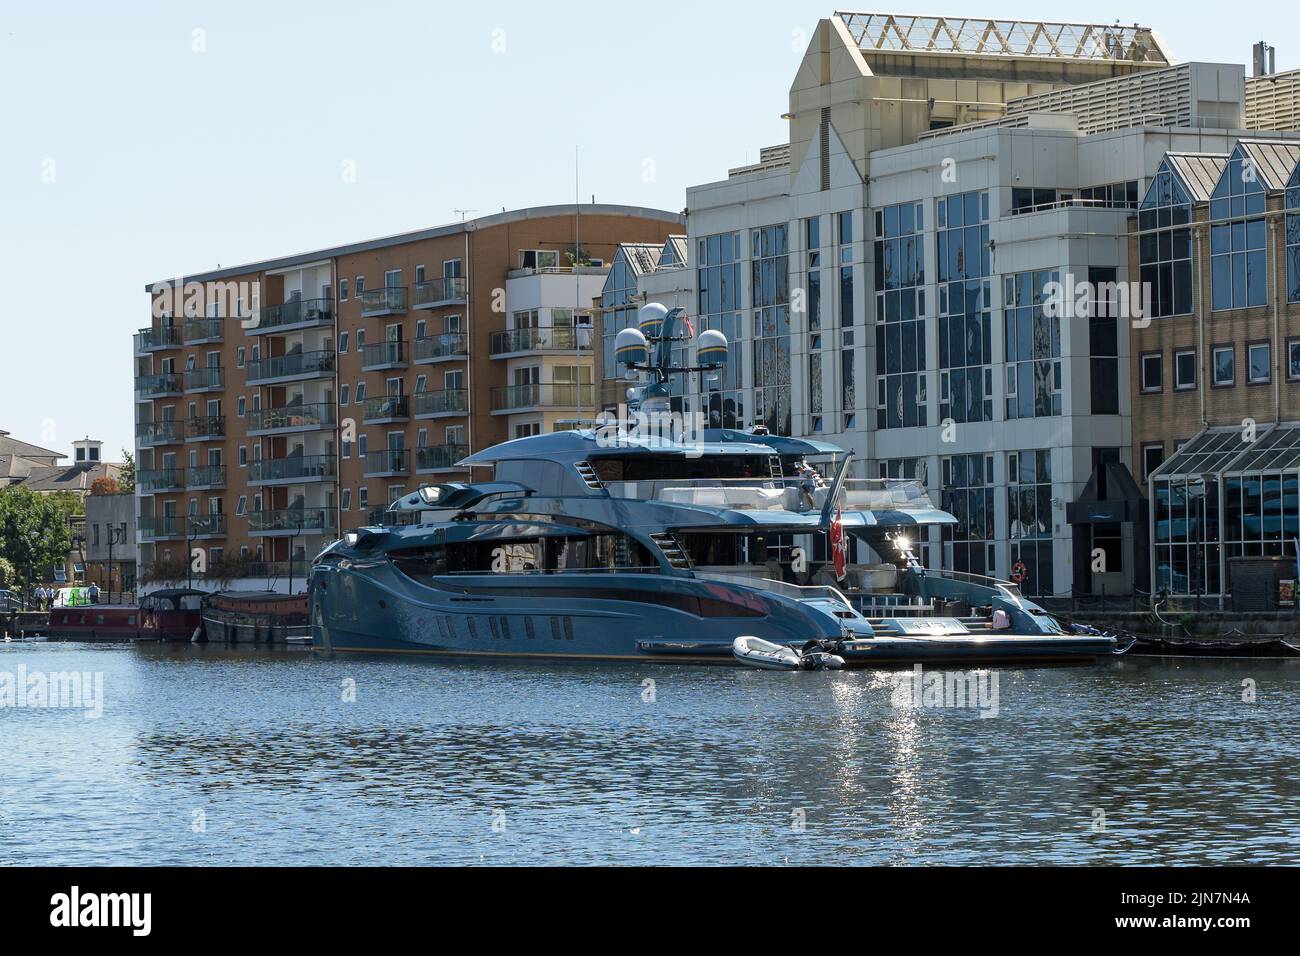 Super yacht moored up in the docklands of Canary Wharf. London - 9th August 2022 Stock Photo